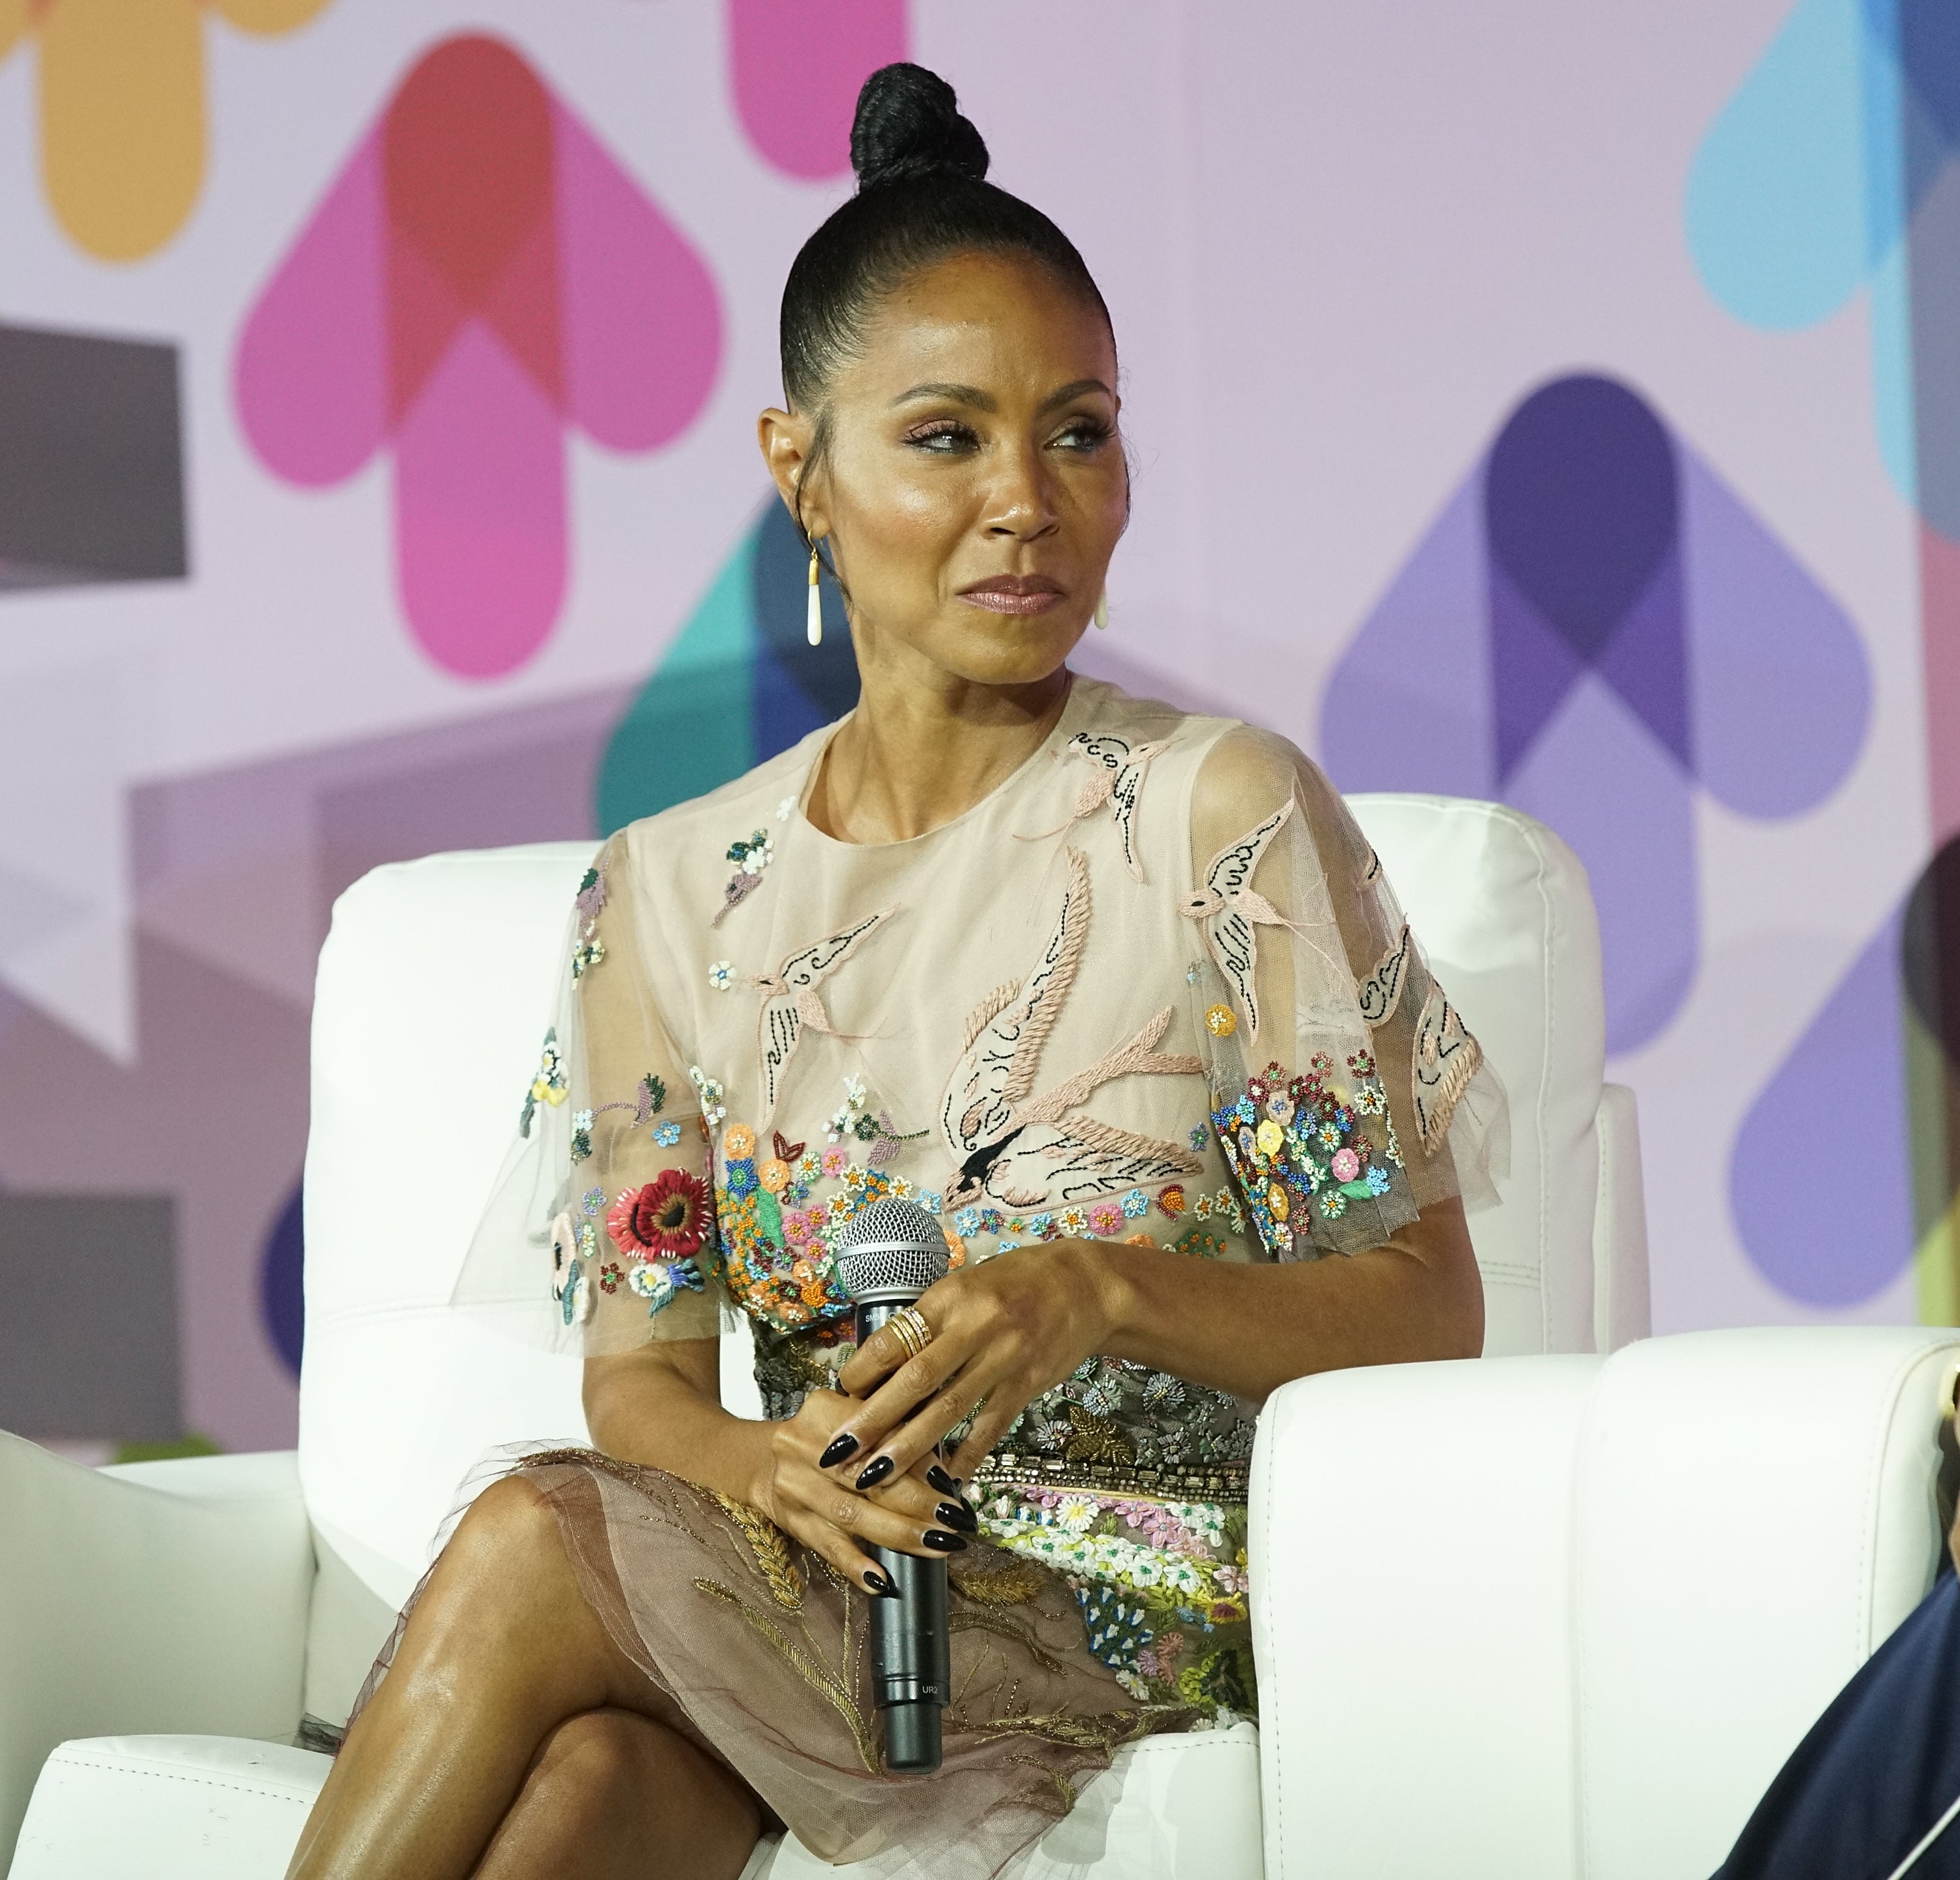 Jada Pinkett Smith, Niecy Nash, Monica And More Share The Advice They'd Give Their 15-Year-Old Selves
